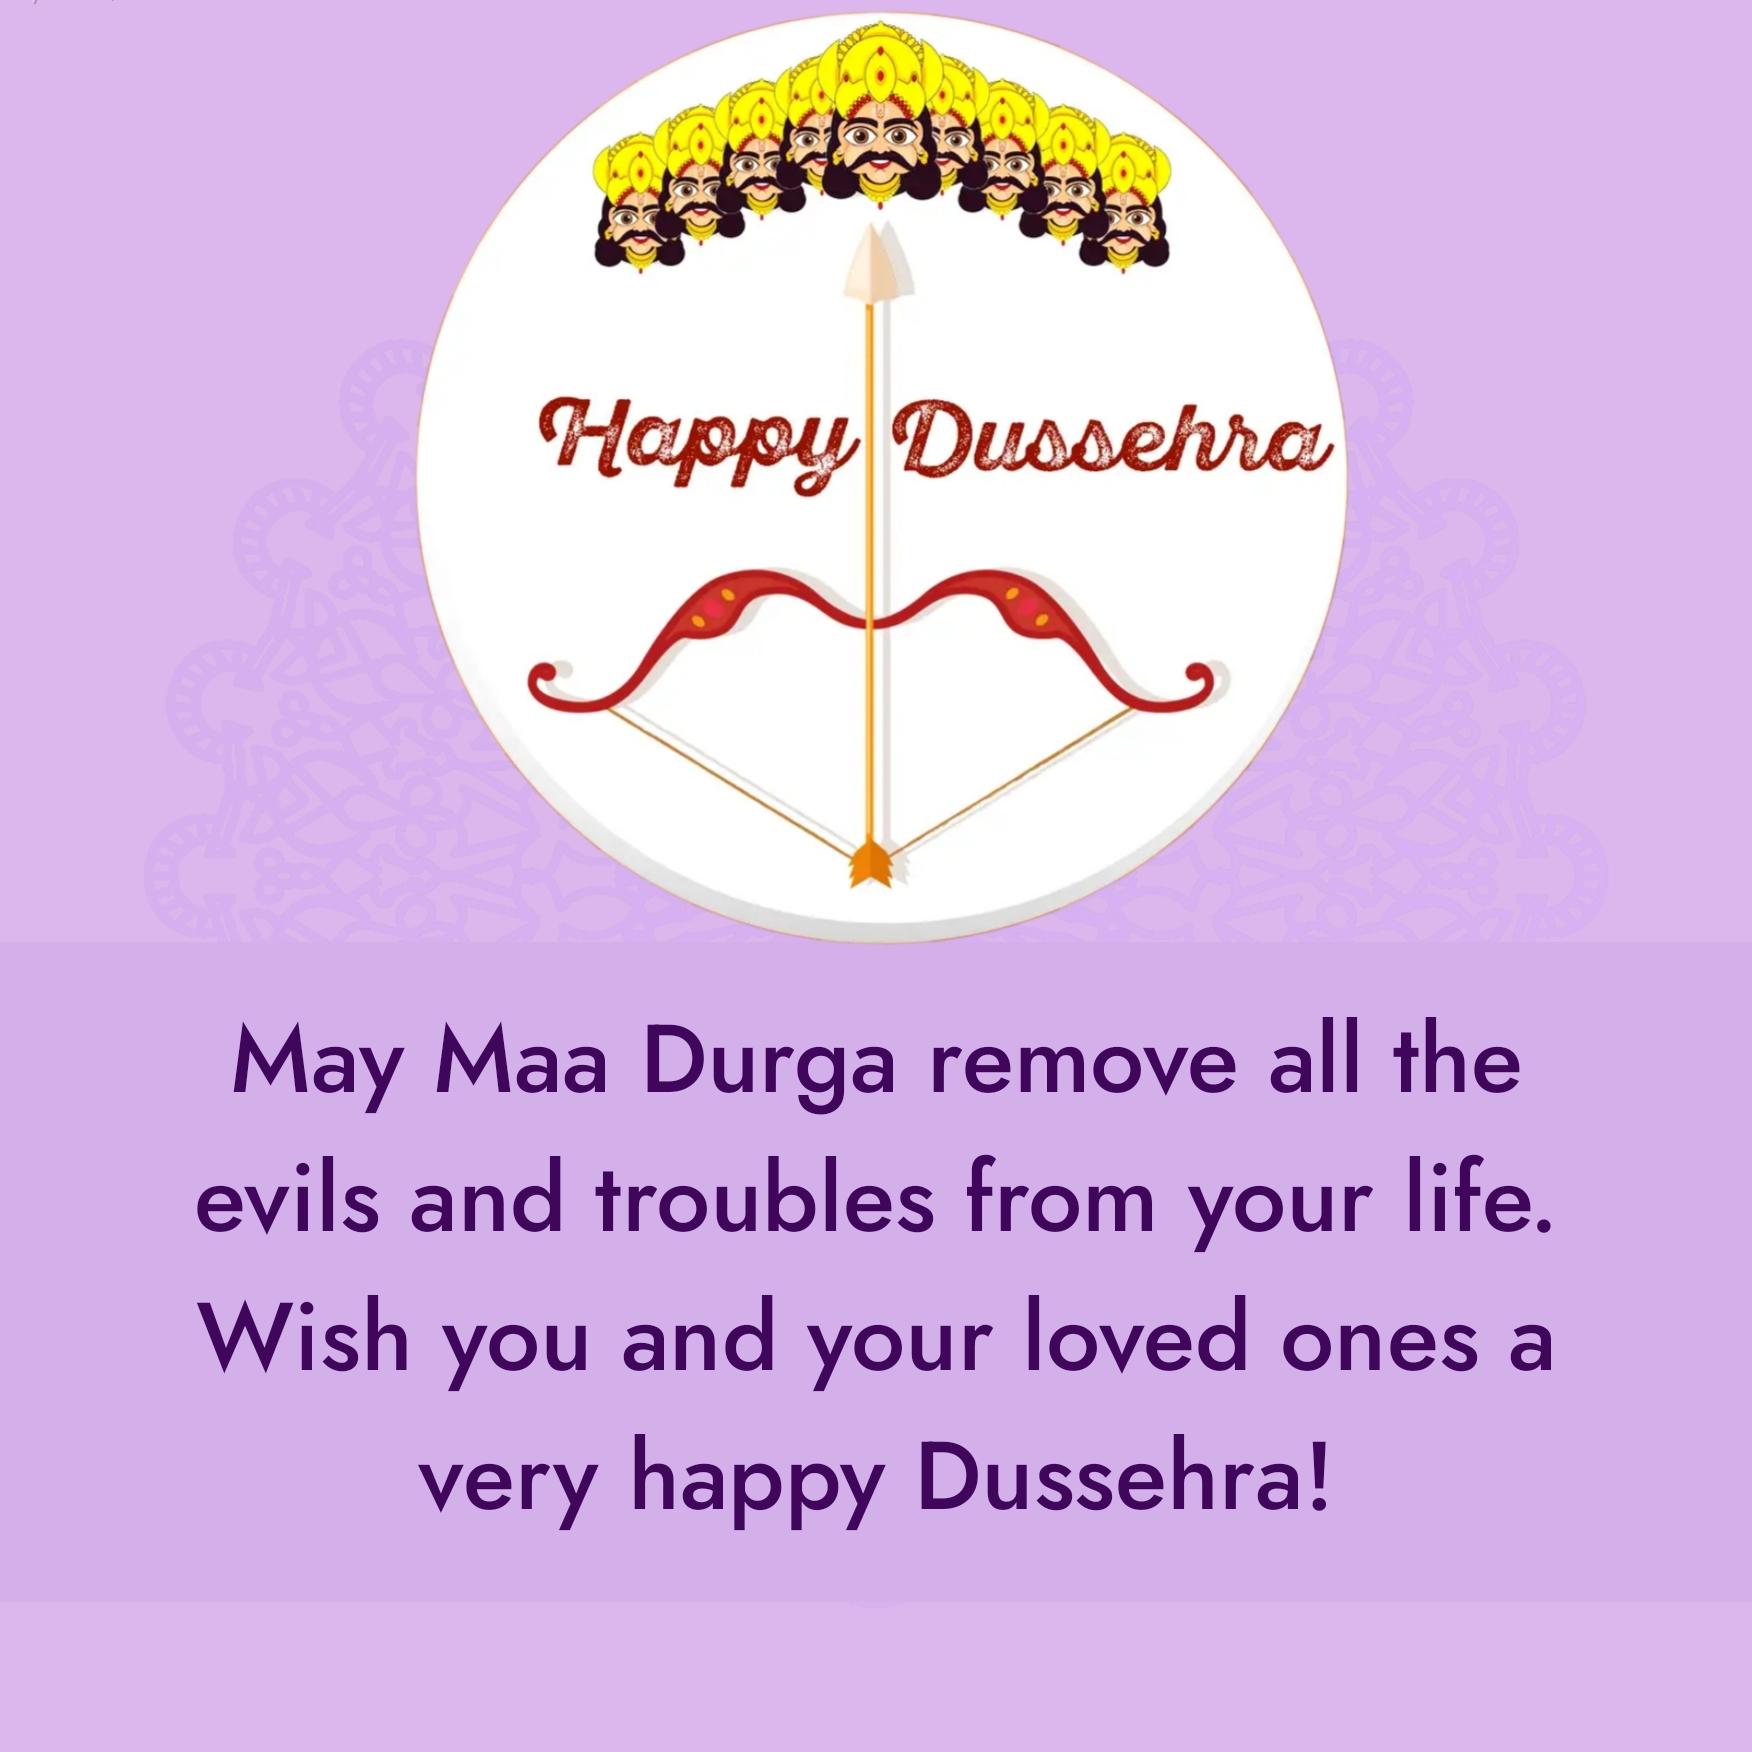 May Maa Durga remove all the evils and troubles